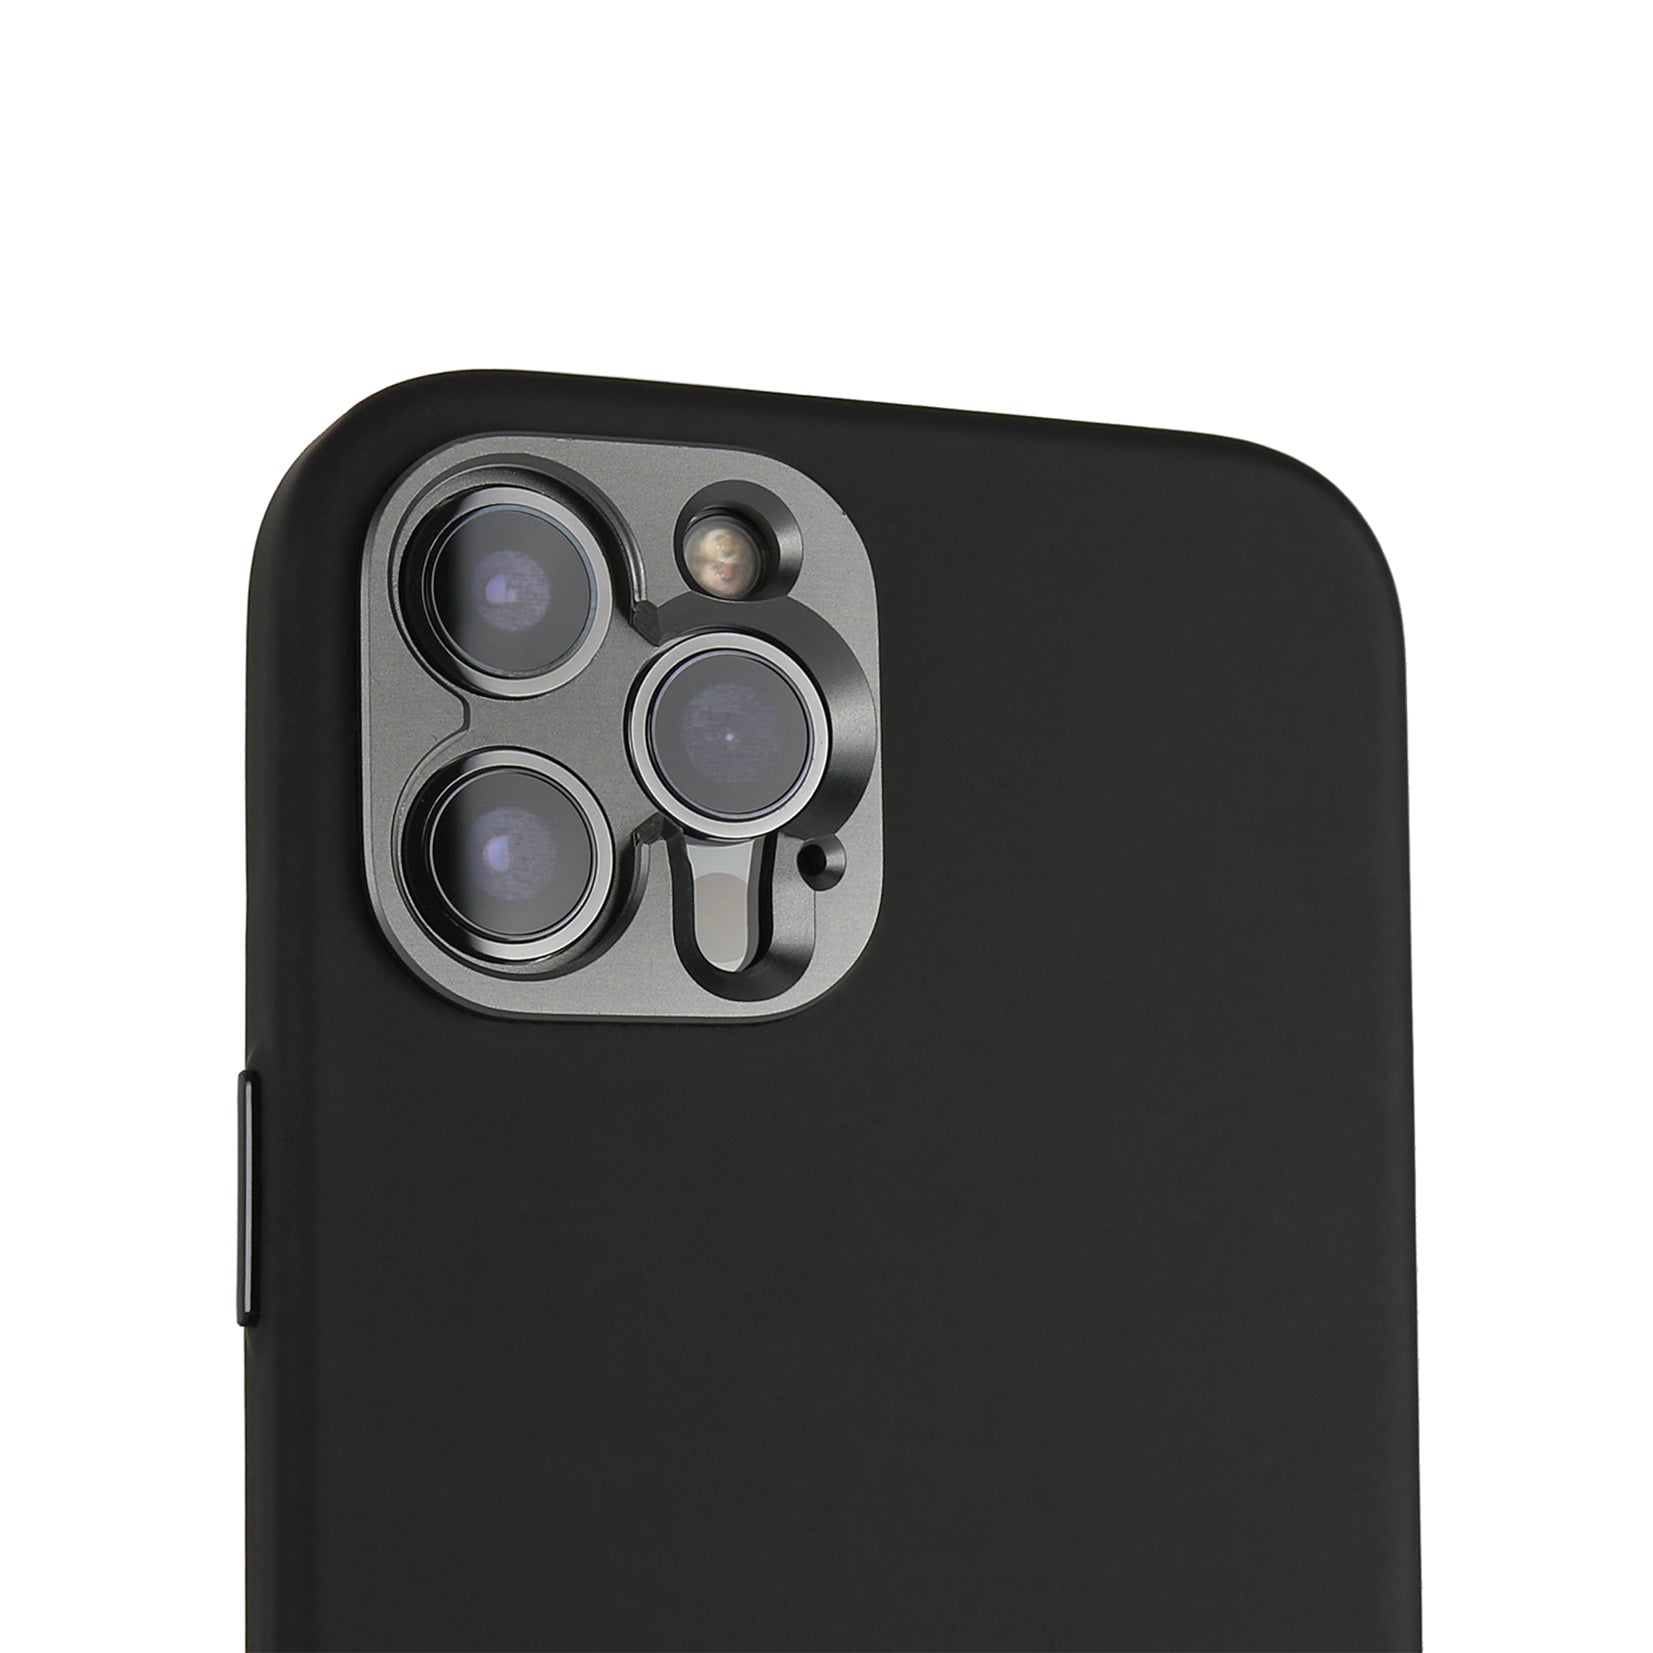 Pro Case - iPhone 13 Pro Max (MagSafe Compatible)